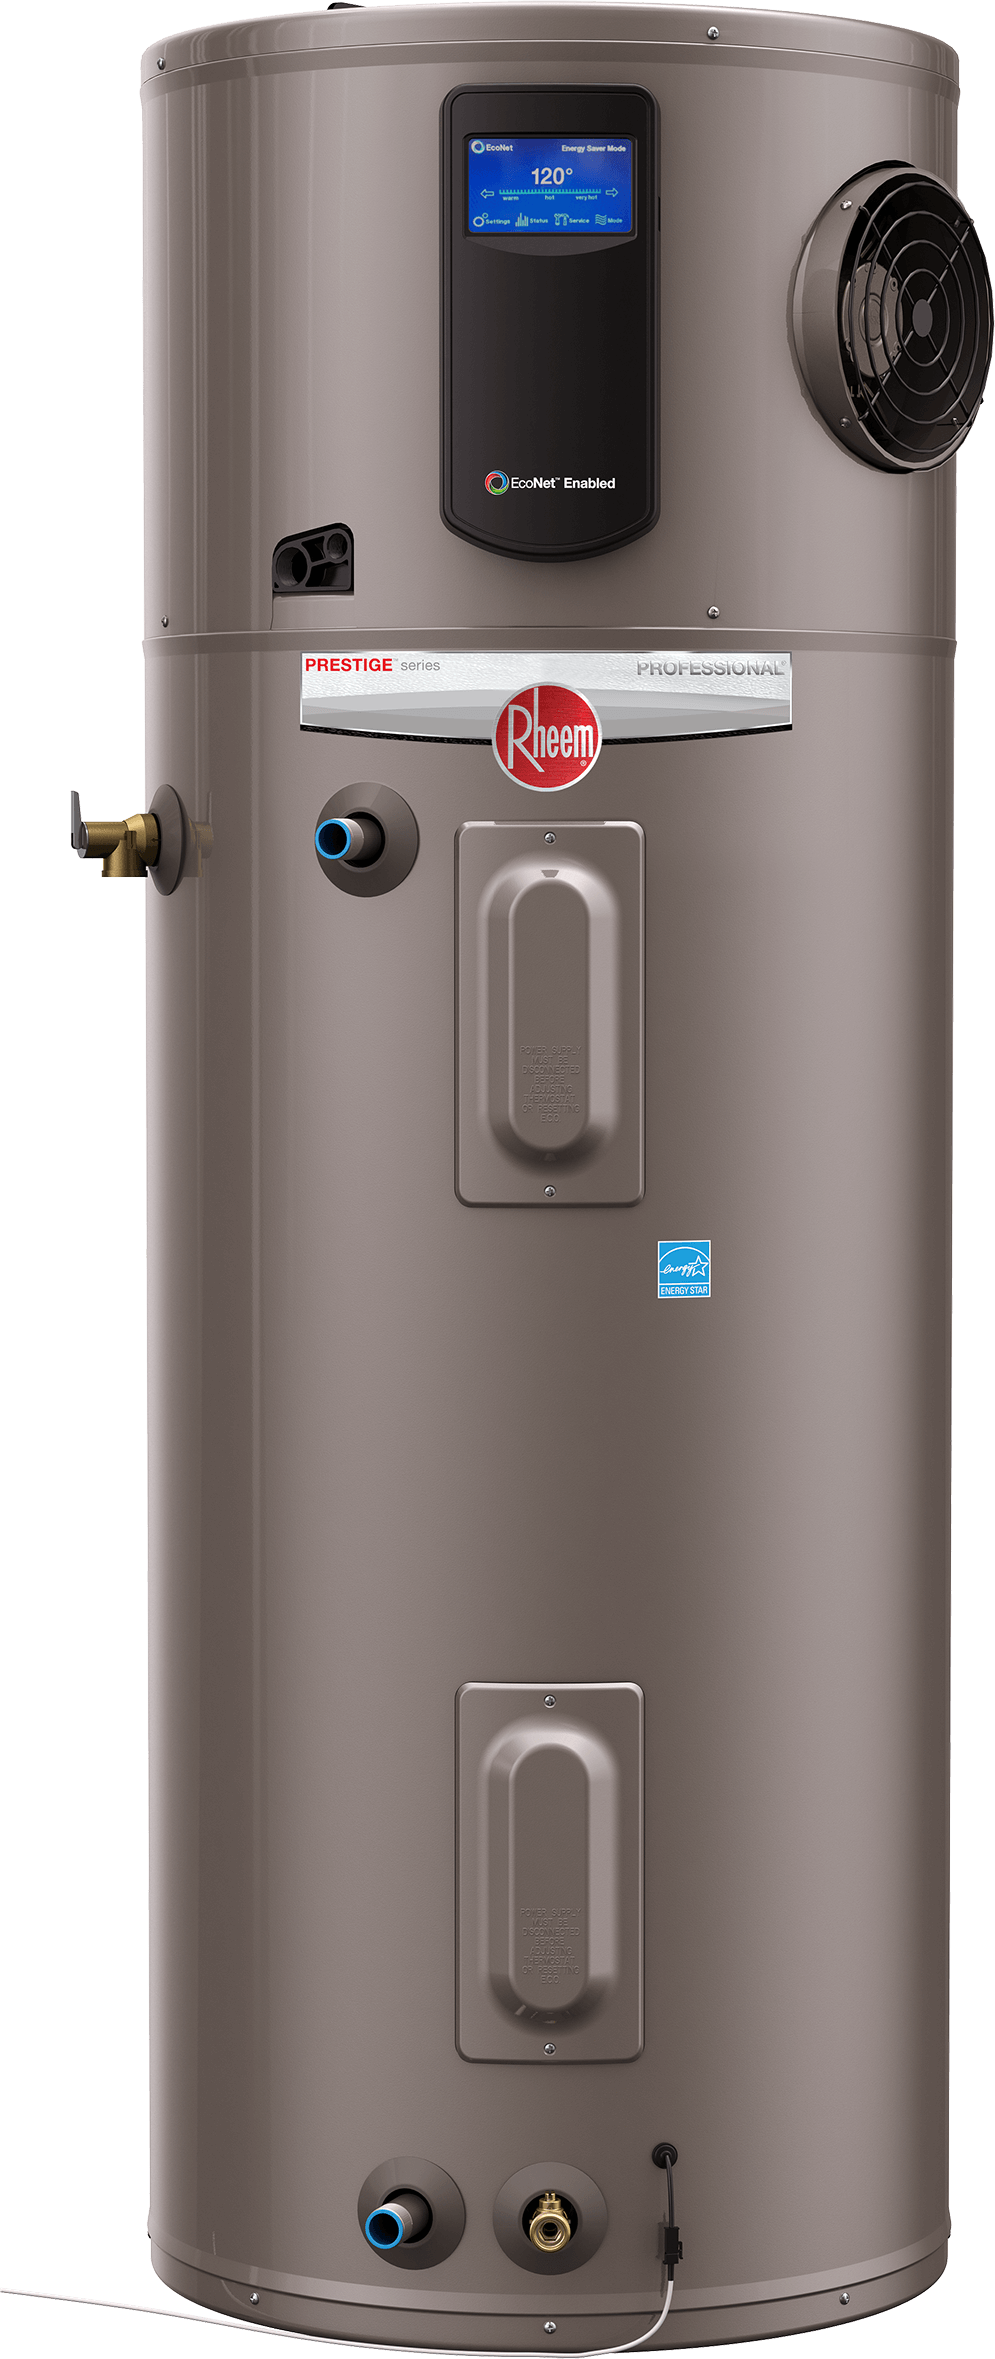 Rheem Electric Water Heater Prices